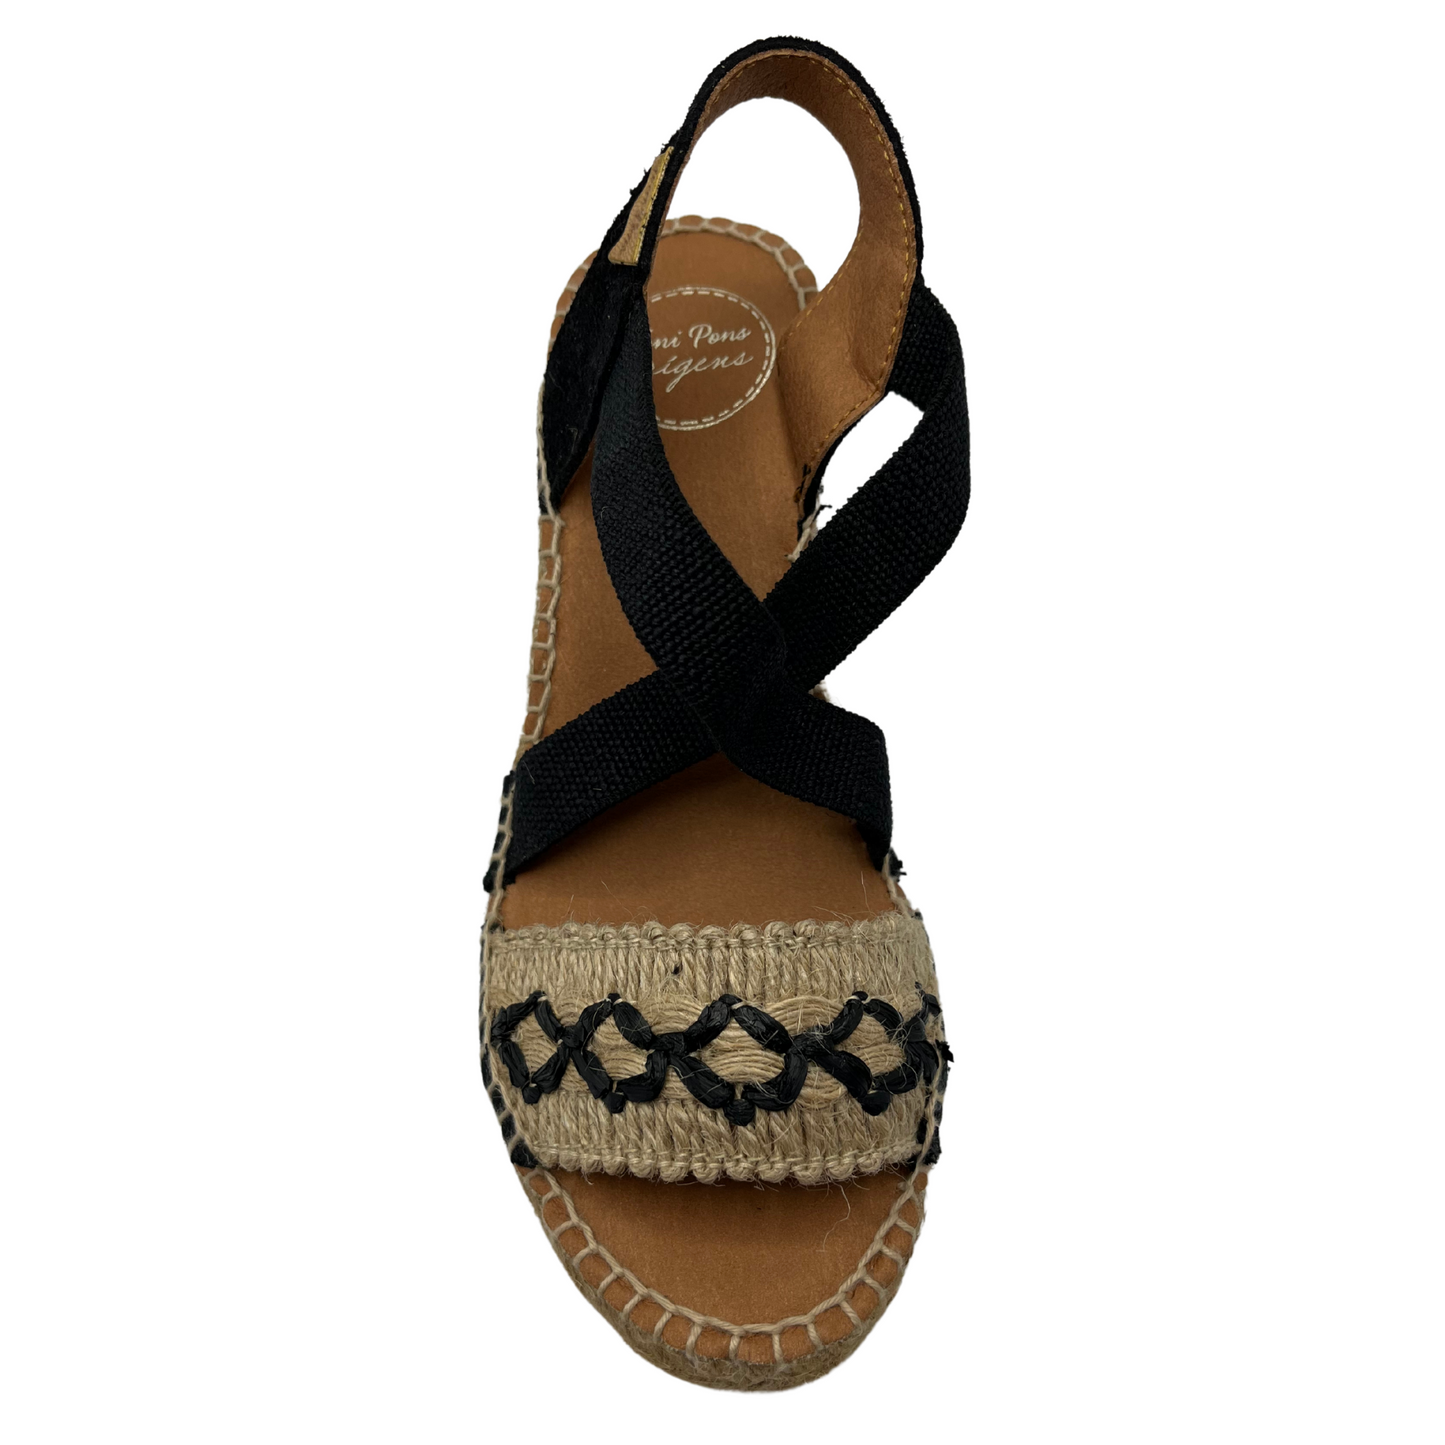 Top view of black and beige wedge sandal with X pattern across toe